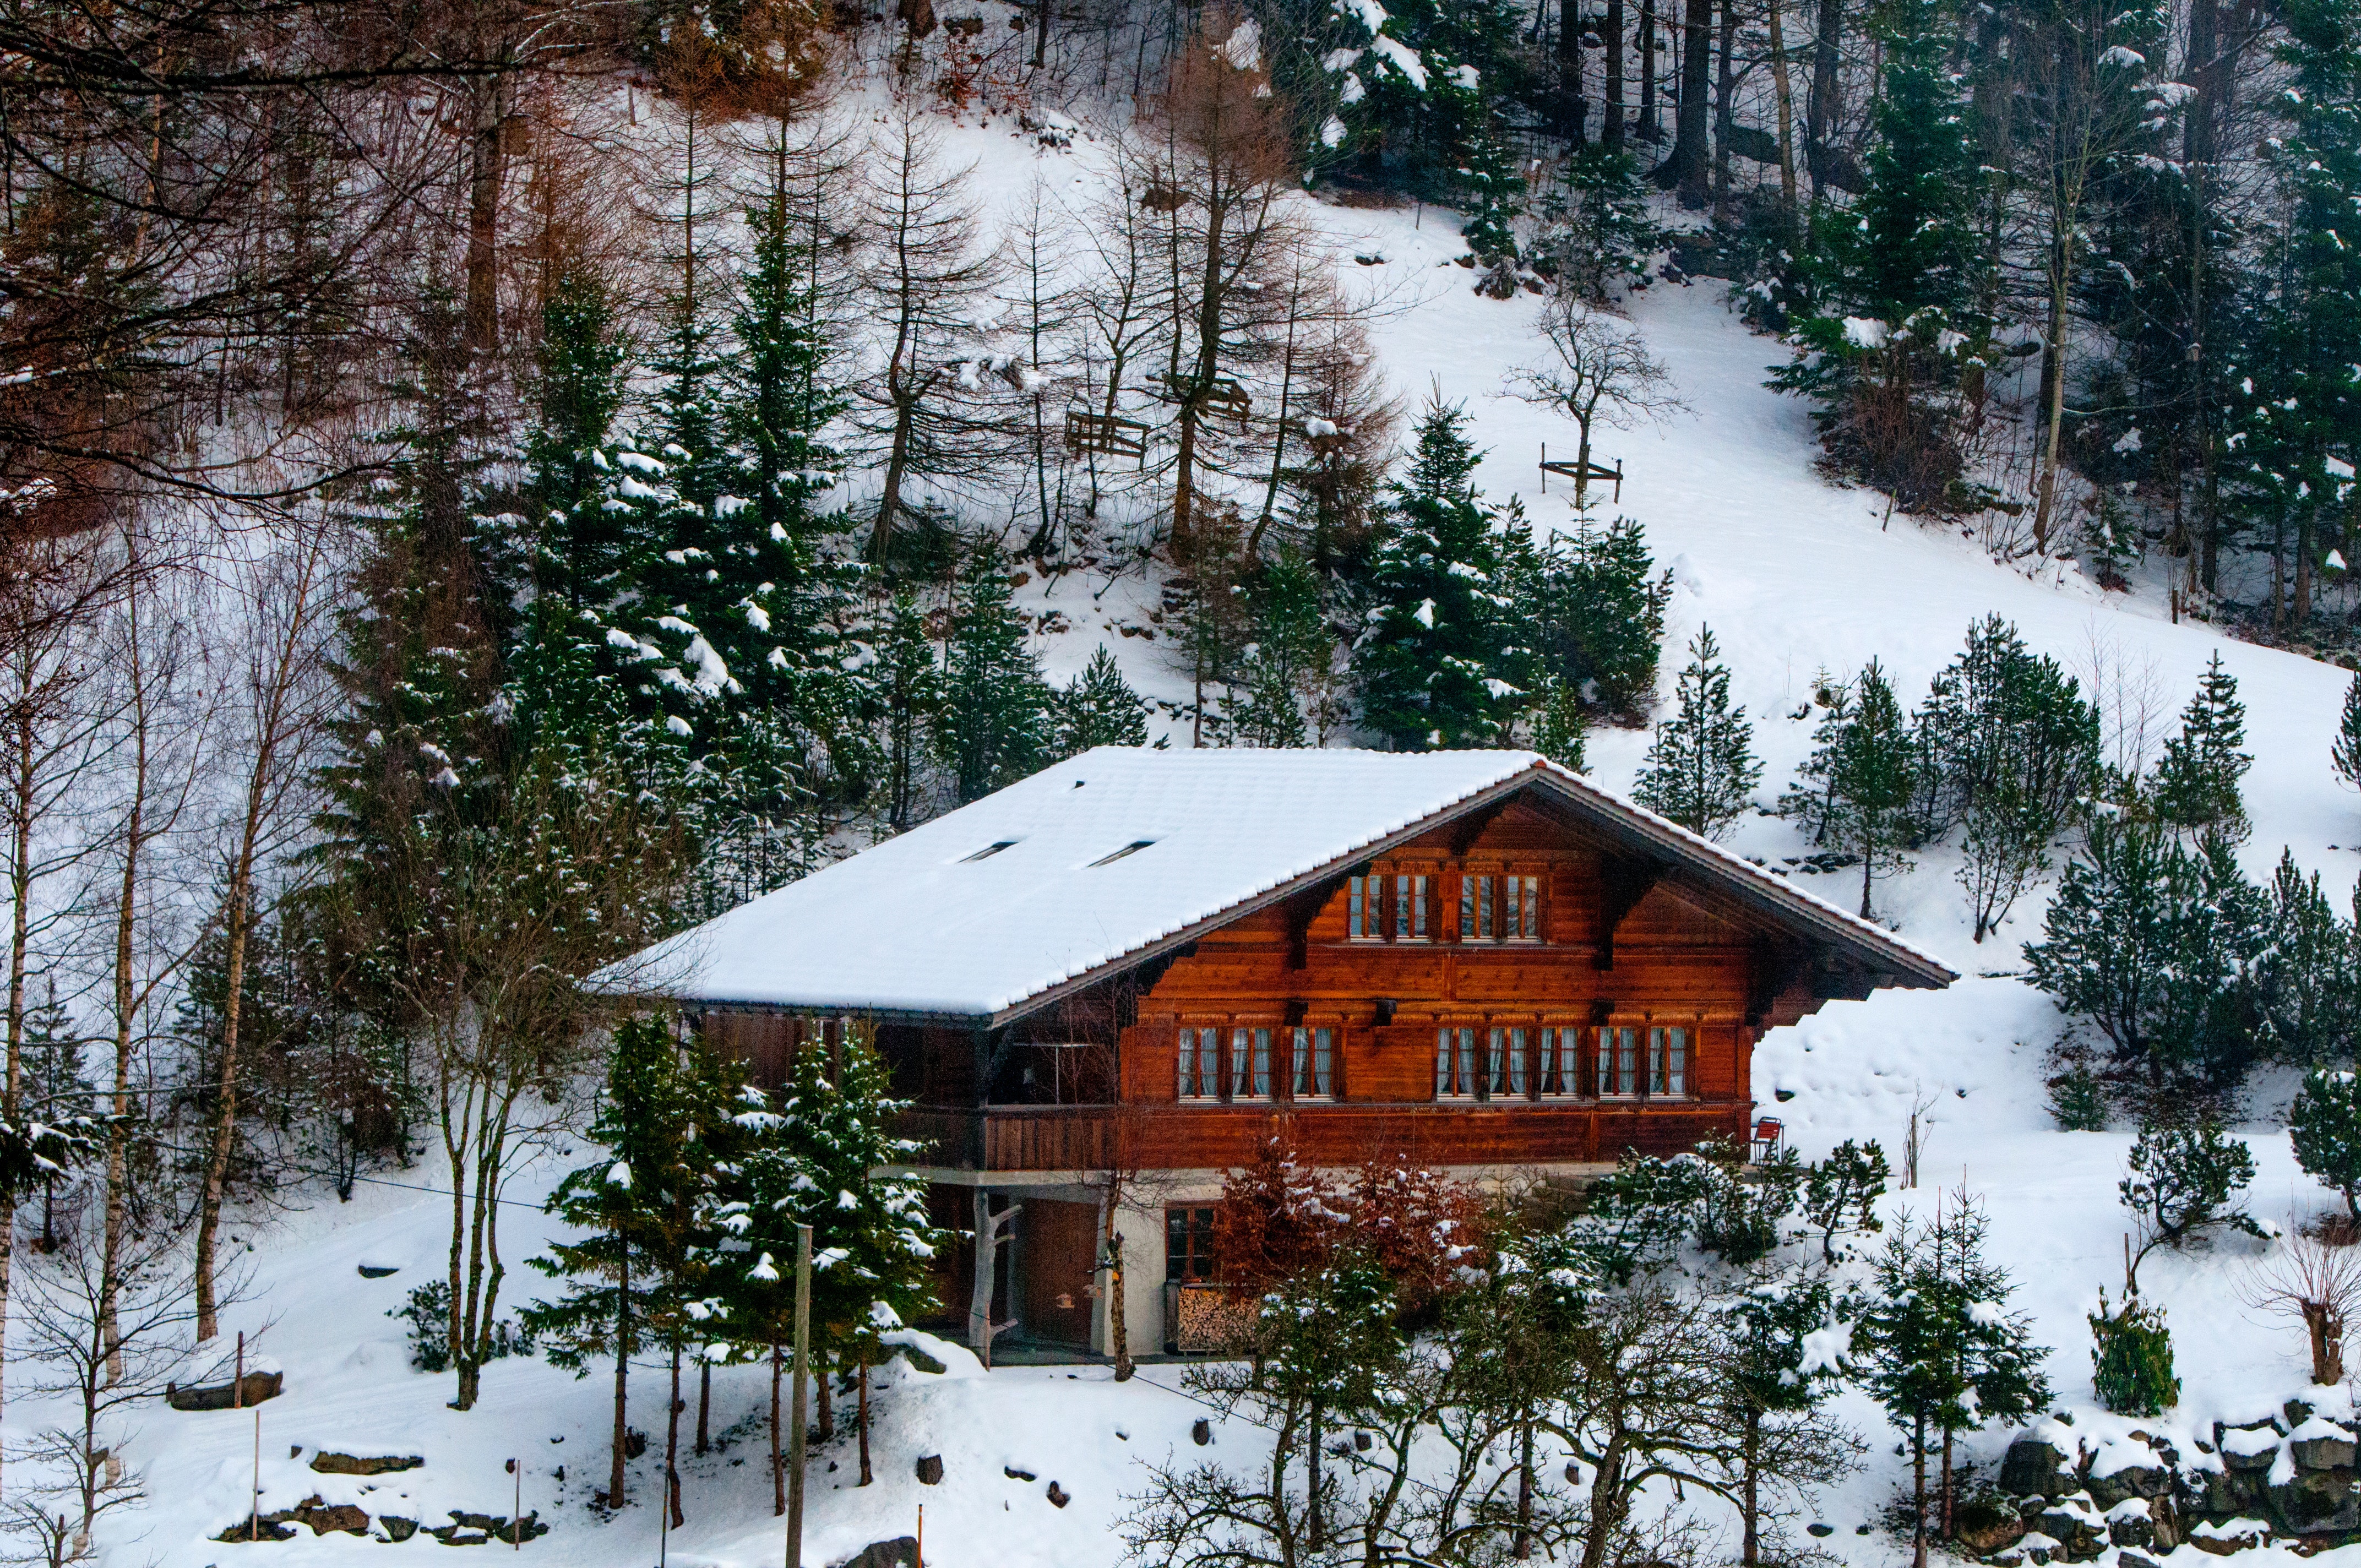 Photo of chalet in the forest